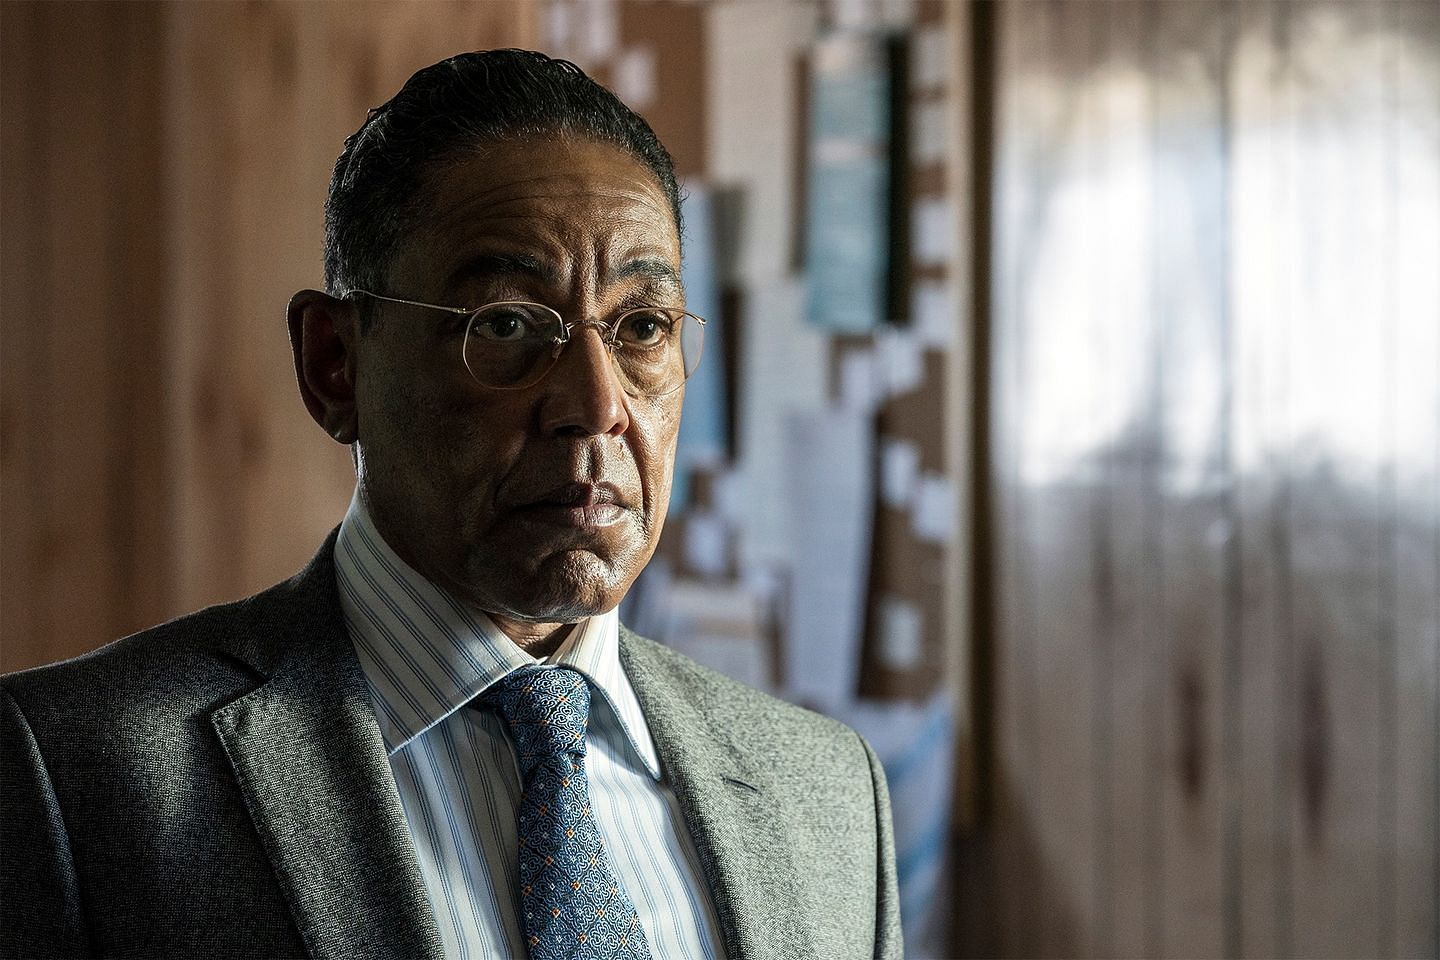 Giancarlo Esposito as Gus Fring (Picture courtesy of official Facebook page)